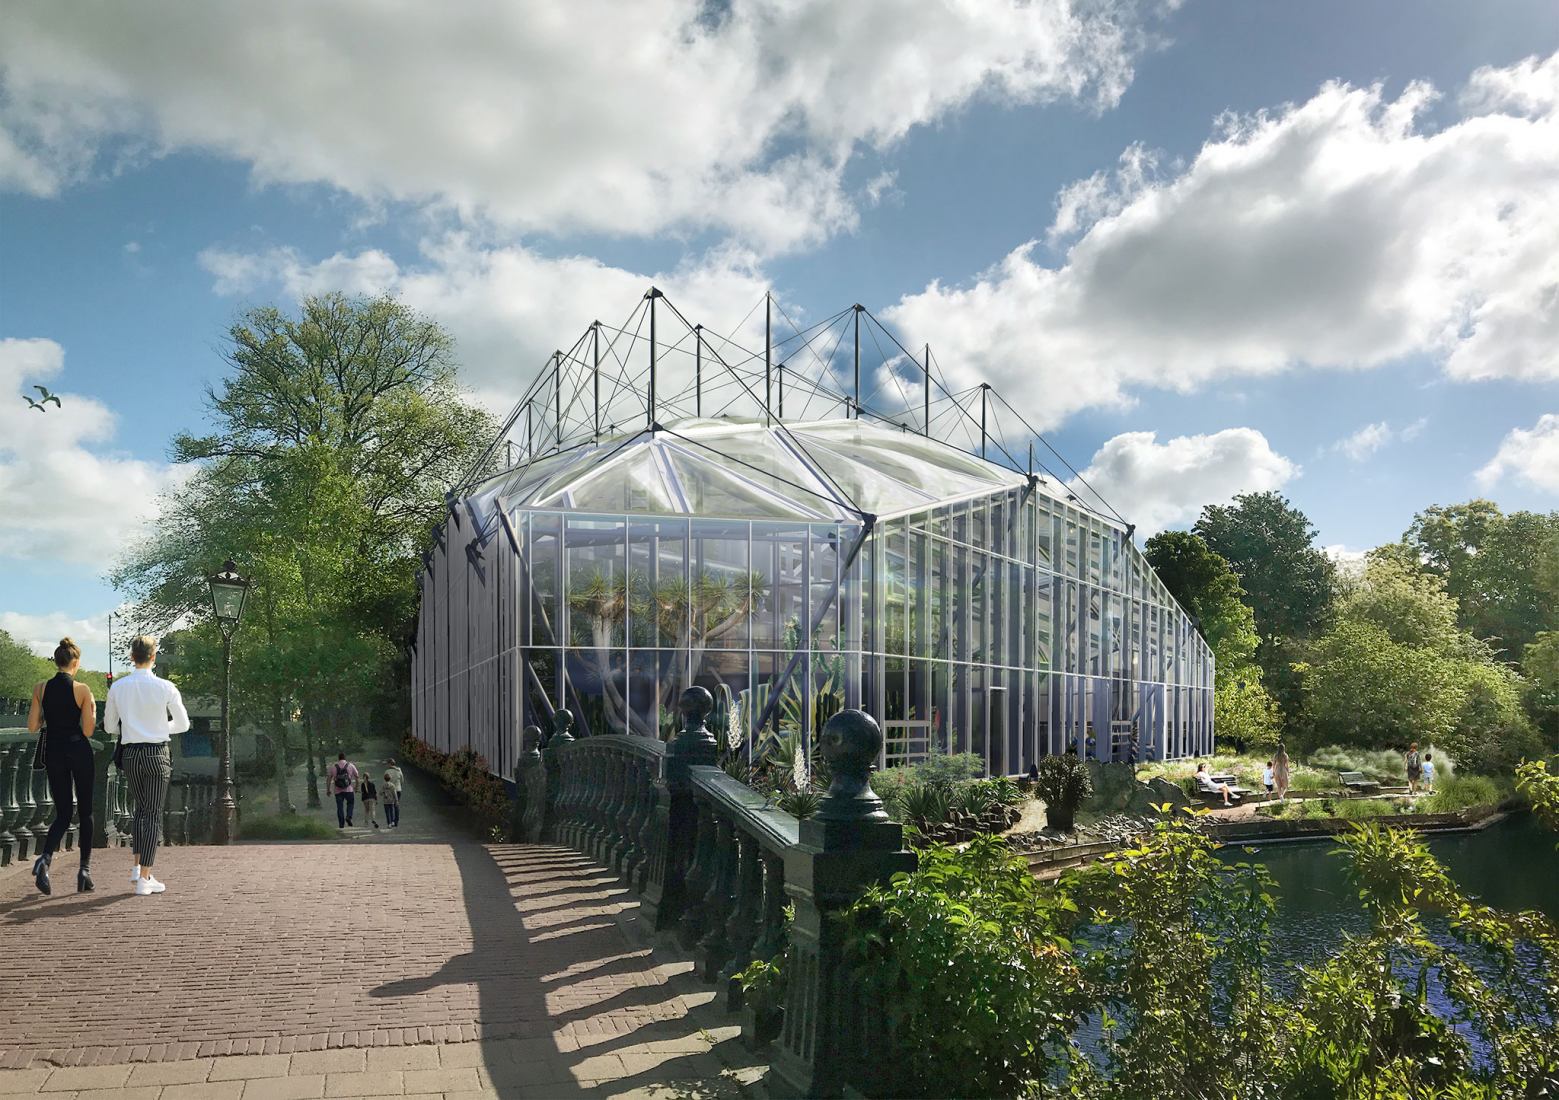 Rendering. Three Climate Greenhouse at the Hortus Botanicus by ZJA. Rendering by ZJA